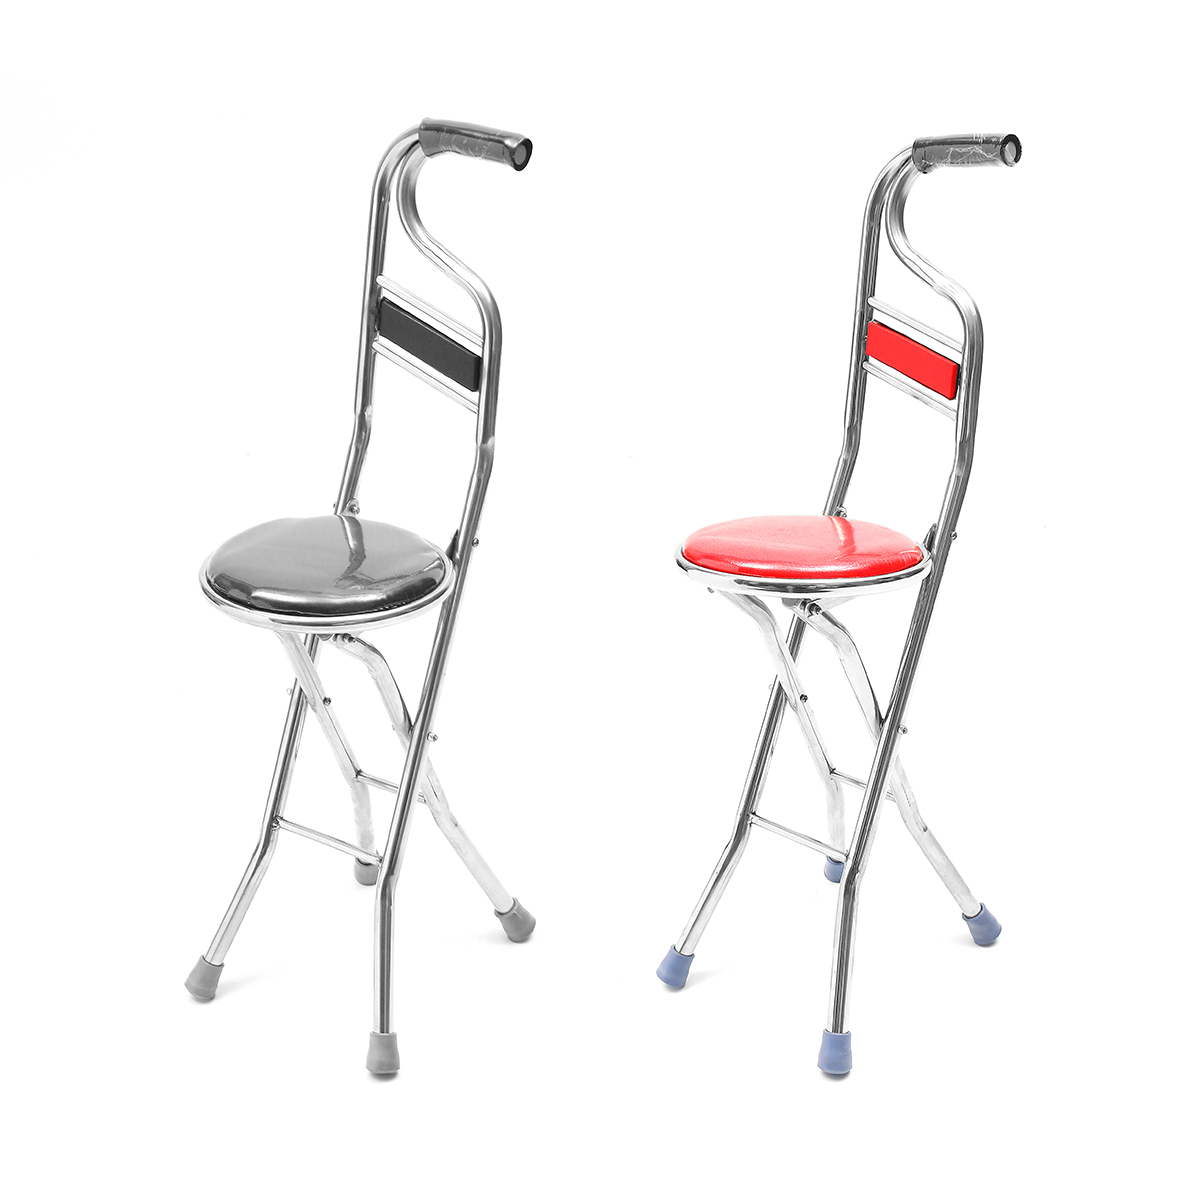 Stainless-Steel-Portable-Folding-Walking-Stick-Chair-Seat-Stool-Travel-Cane-1330325